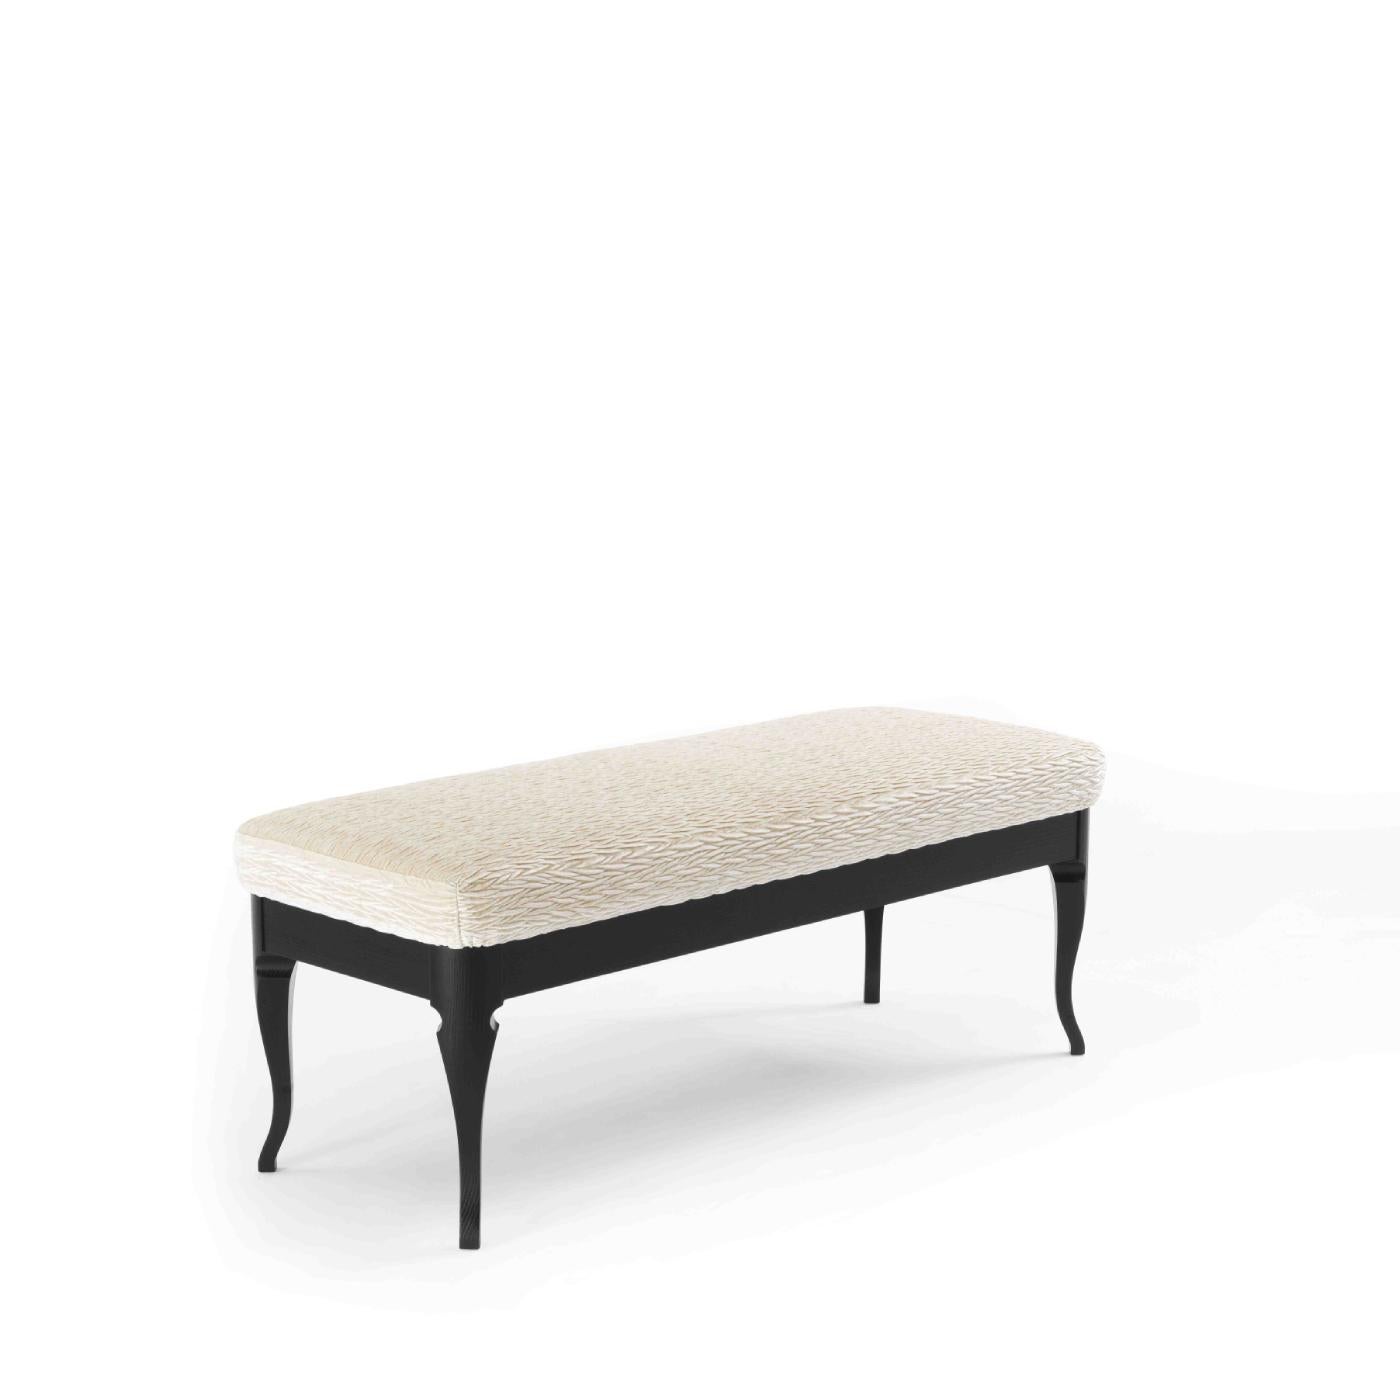 With its unique style that combines retro-inspiration with a modern aesthetic, this bench offers a functional accent in a modern and mid-century interior. The solid ash frame is embellished with a dark, ebonized finish that complements the